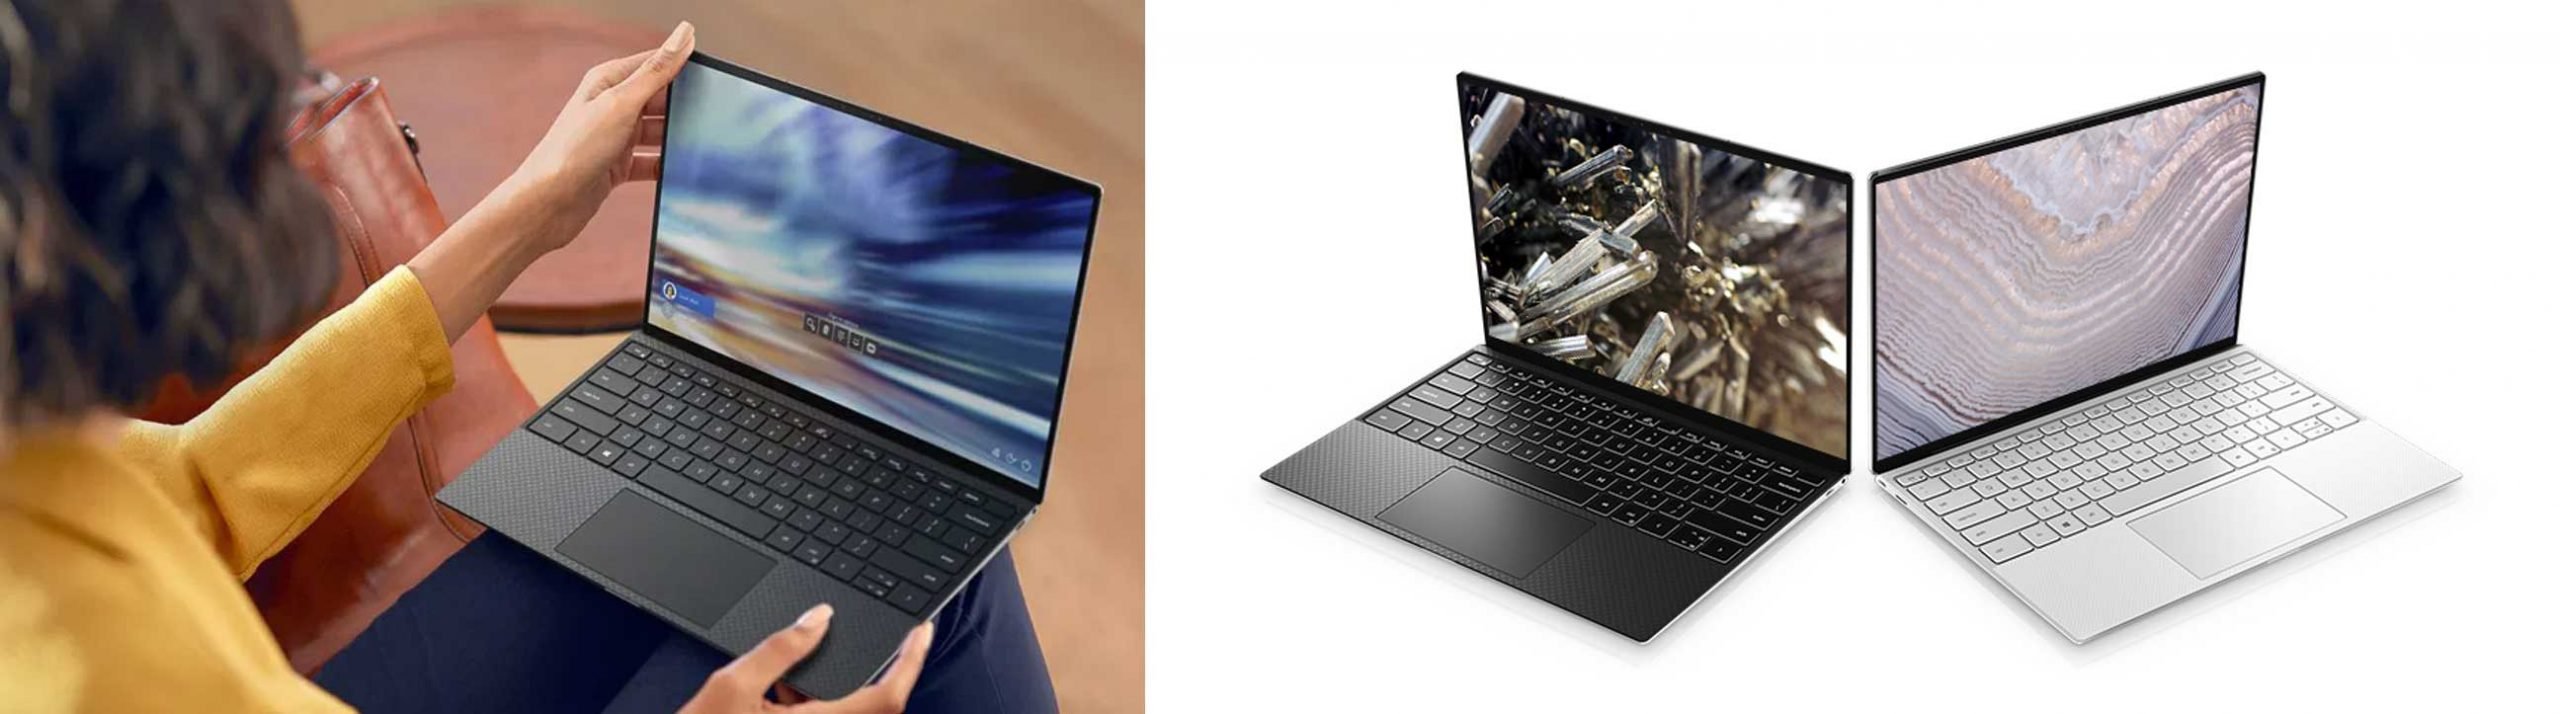 Best ultrabooks and portable laptops in 2020 – complete buying guide